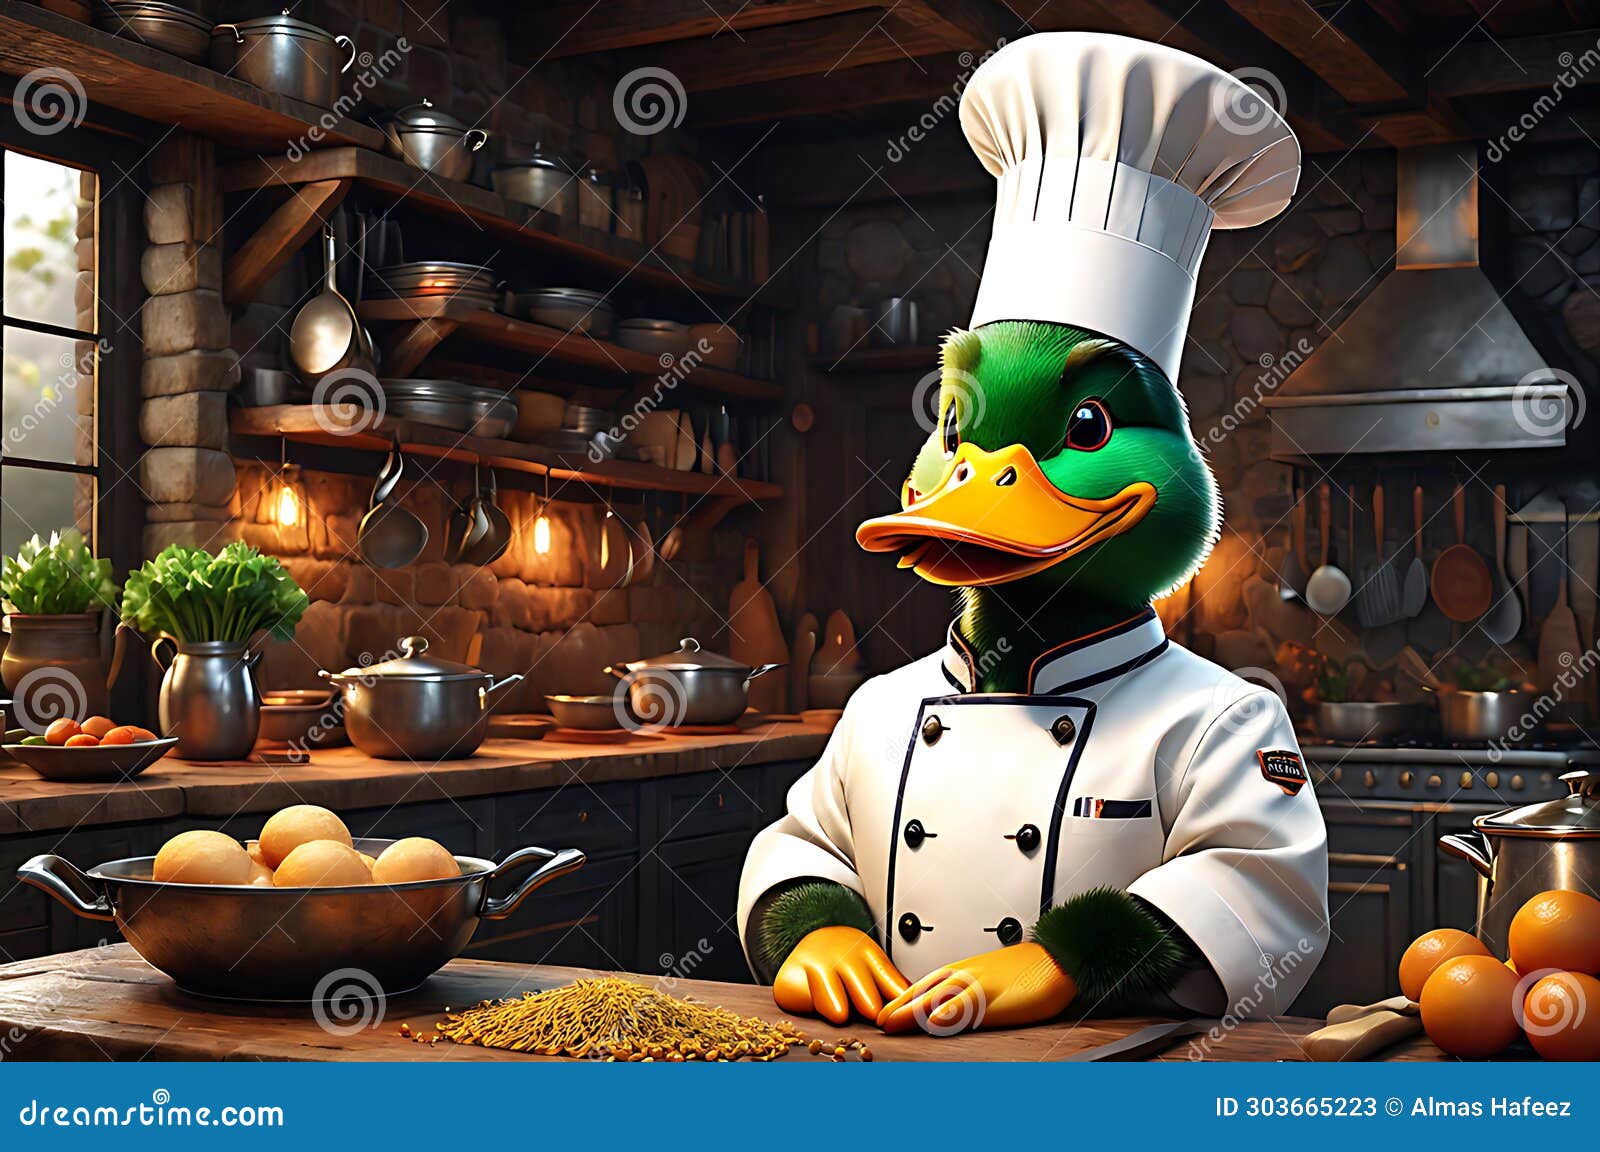 quirky culinary maestro: duck adorned in tailored chef uniform, poised in rustic kitchen ambiance, crafting culinary delights